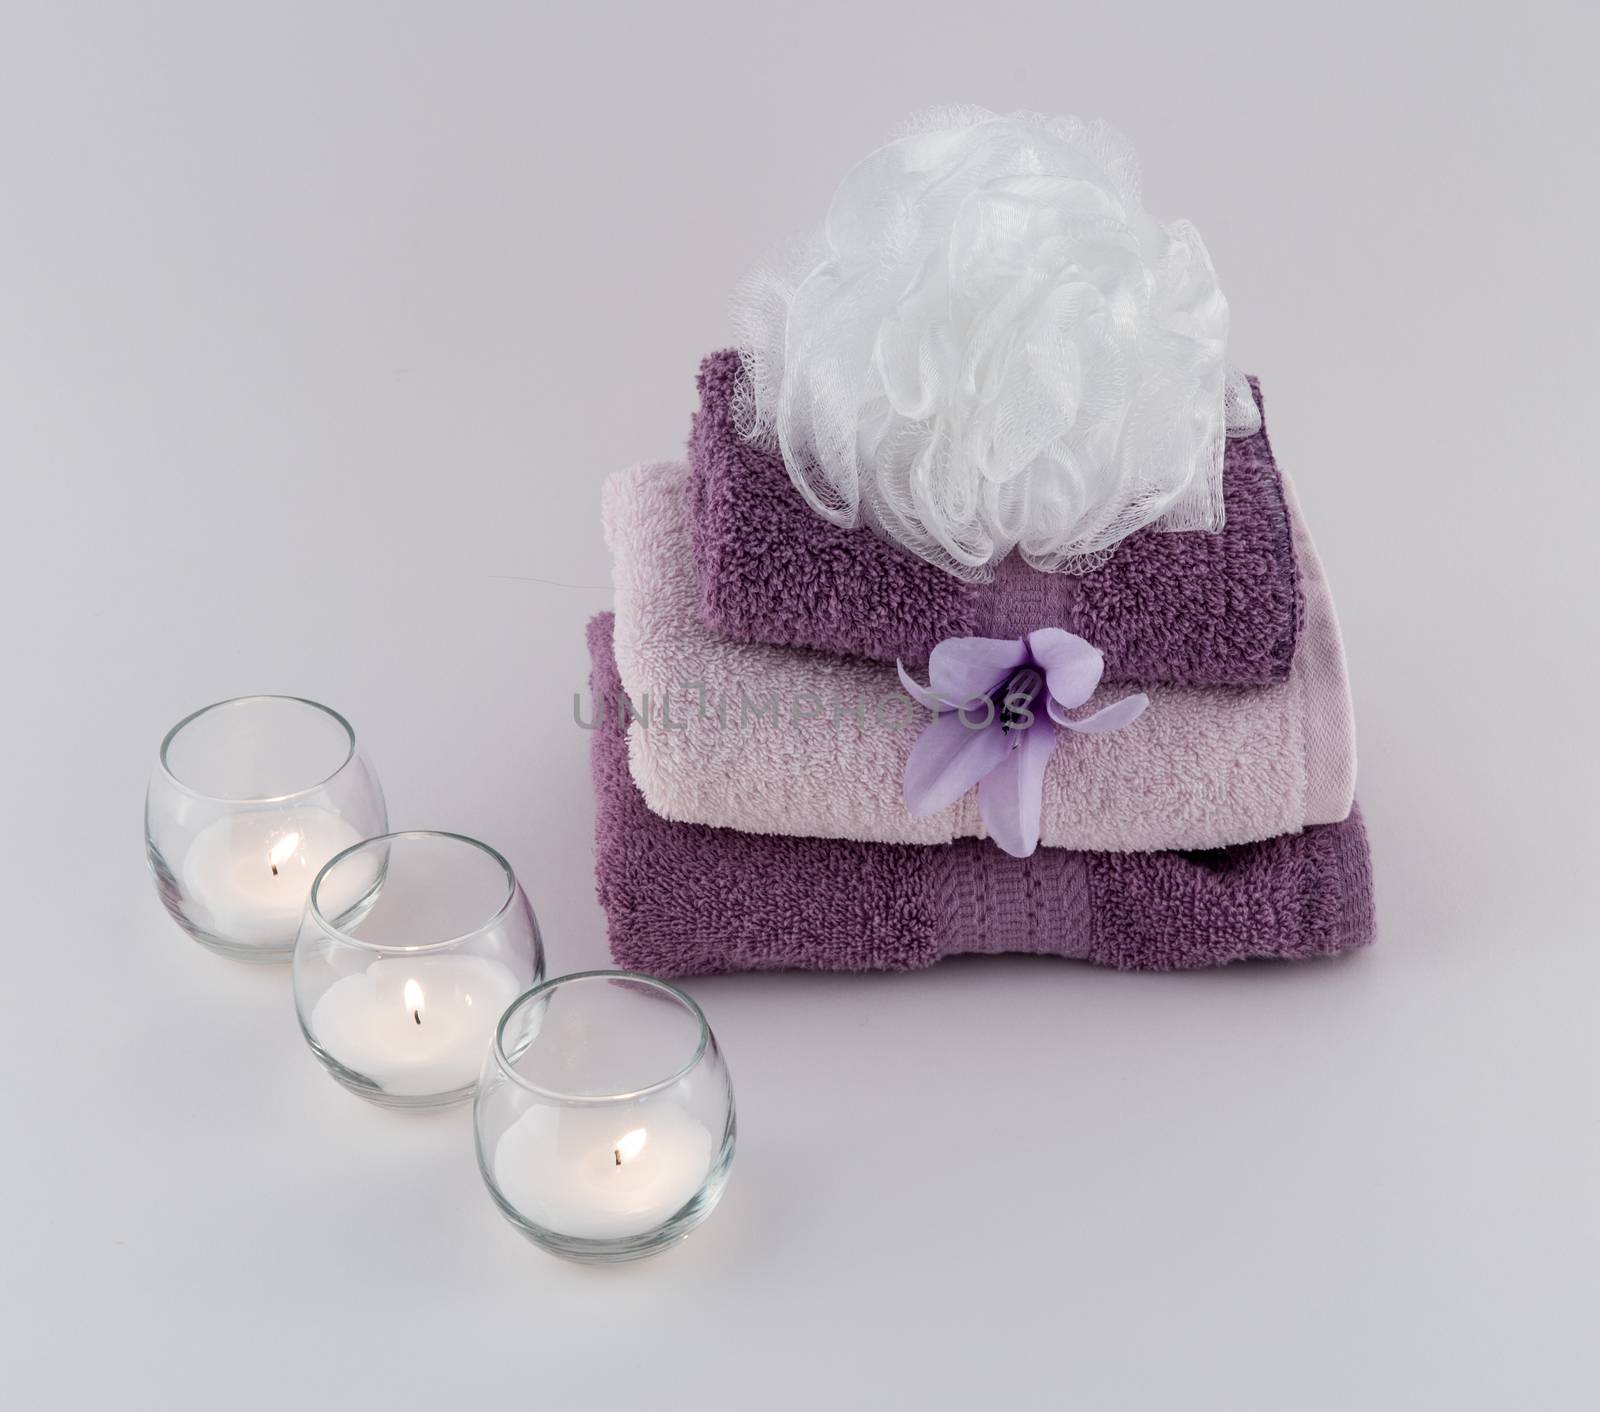 Spa towels and bath pouf with candles